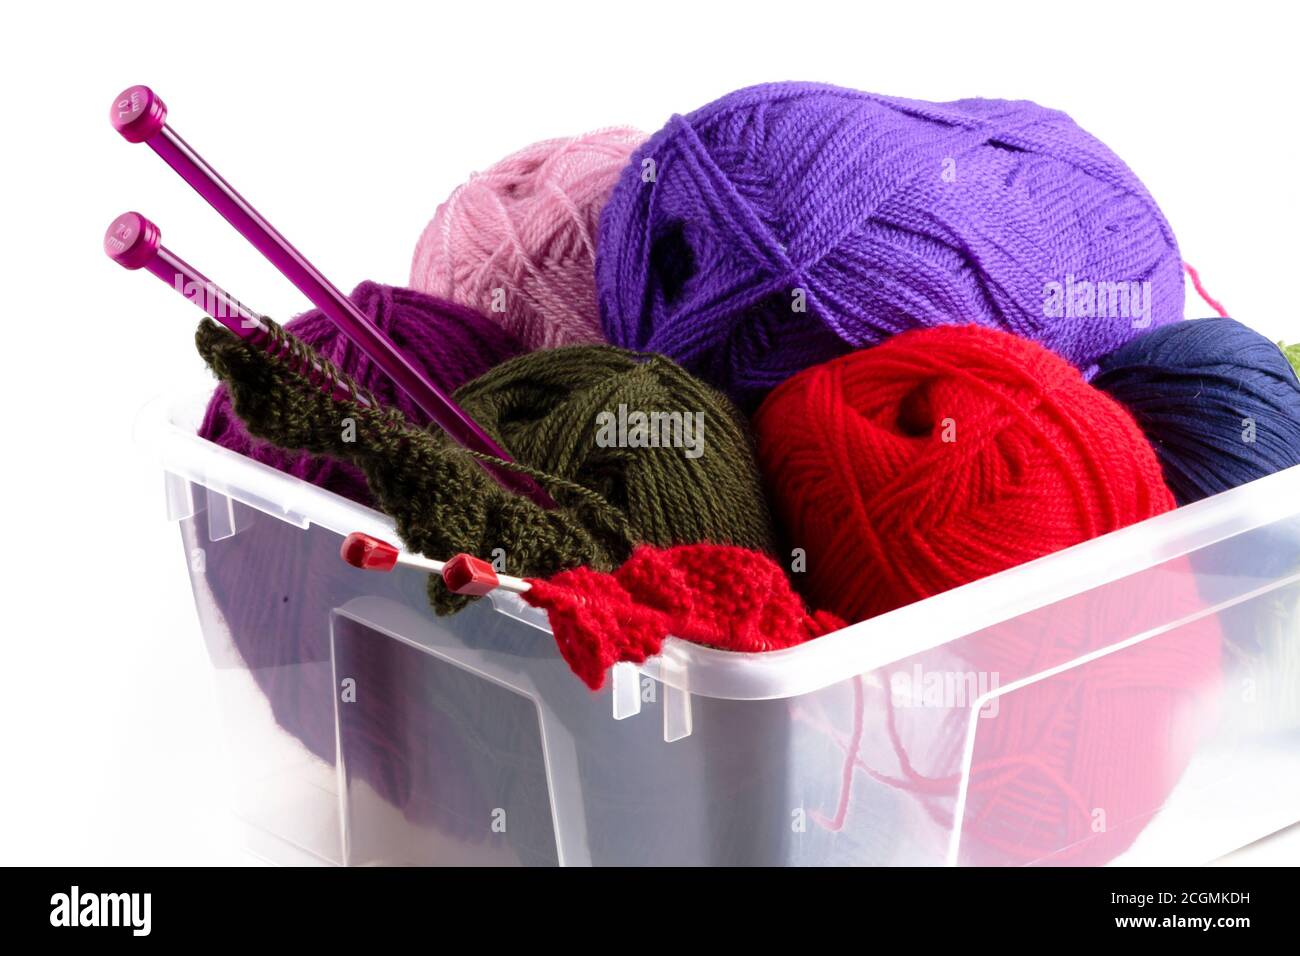 Plastic box with knitting needles and wool Stock Photo